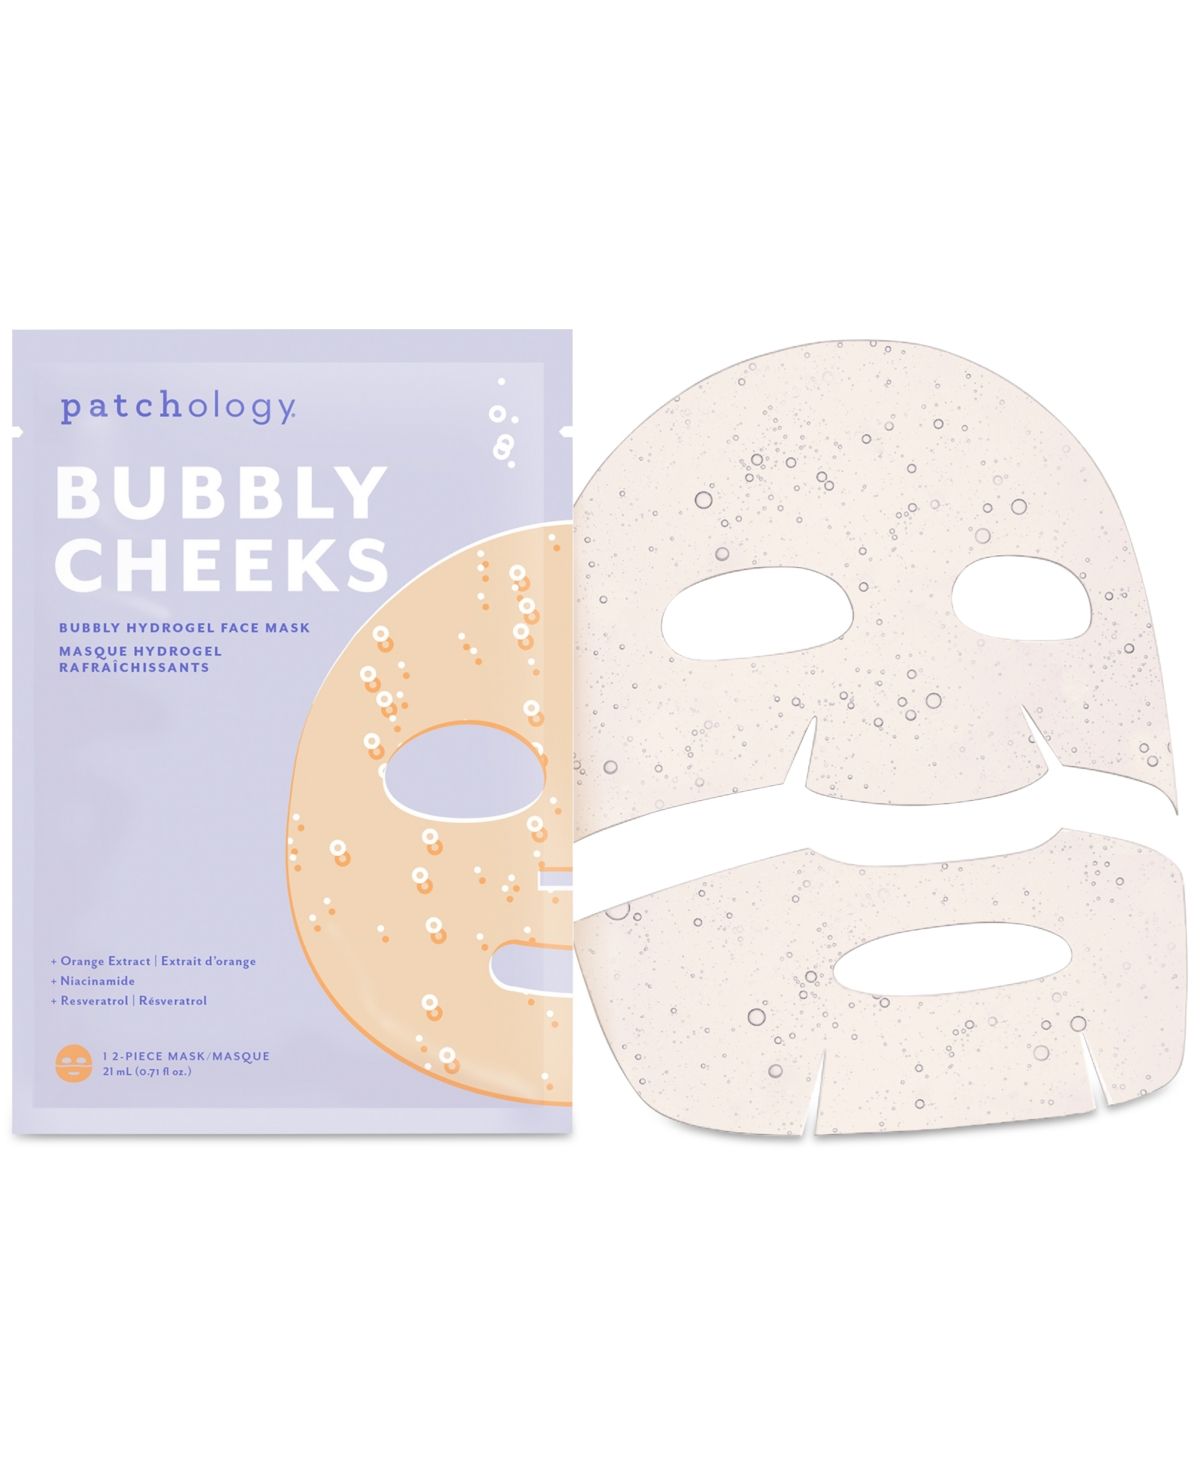 Patchology Bubbly Cheeks Brightening Hydrogel Face Mask | Macys (US)